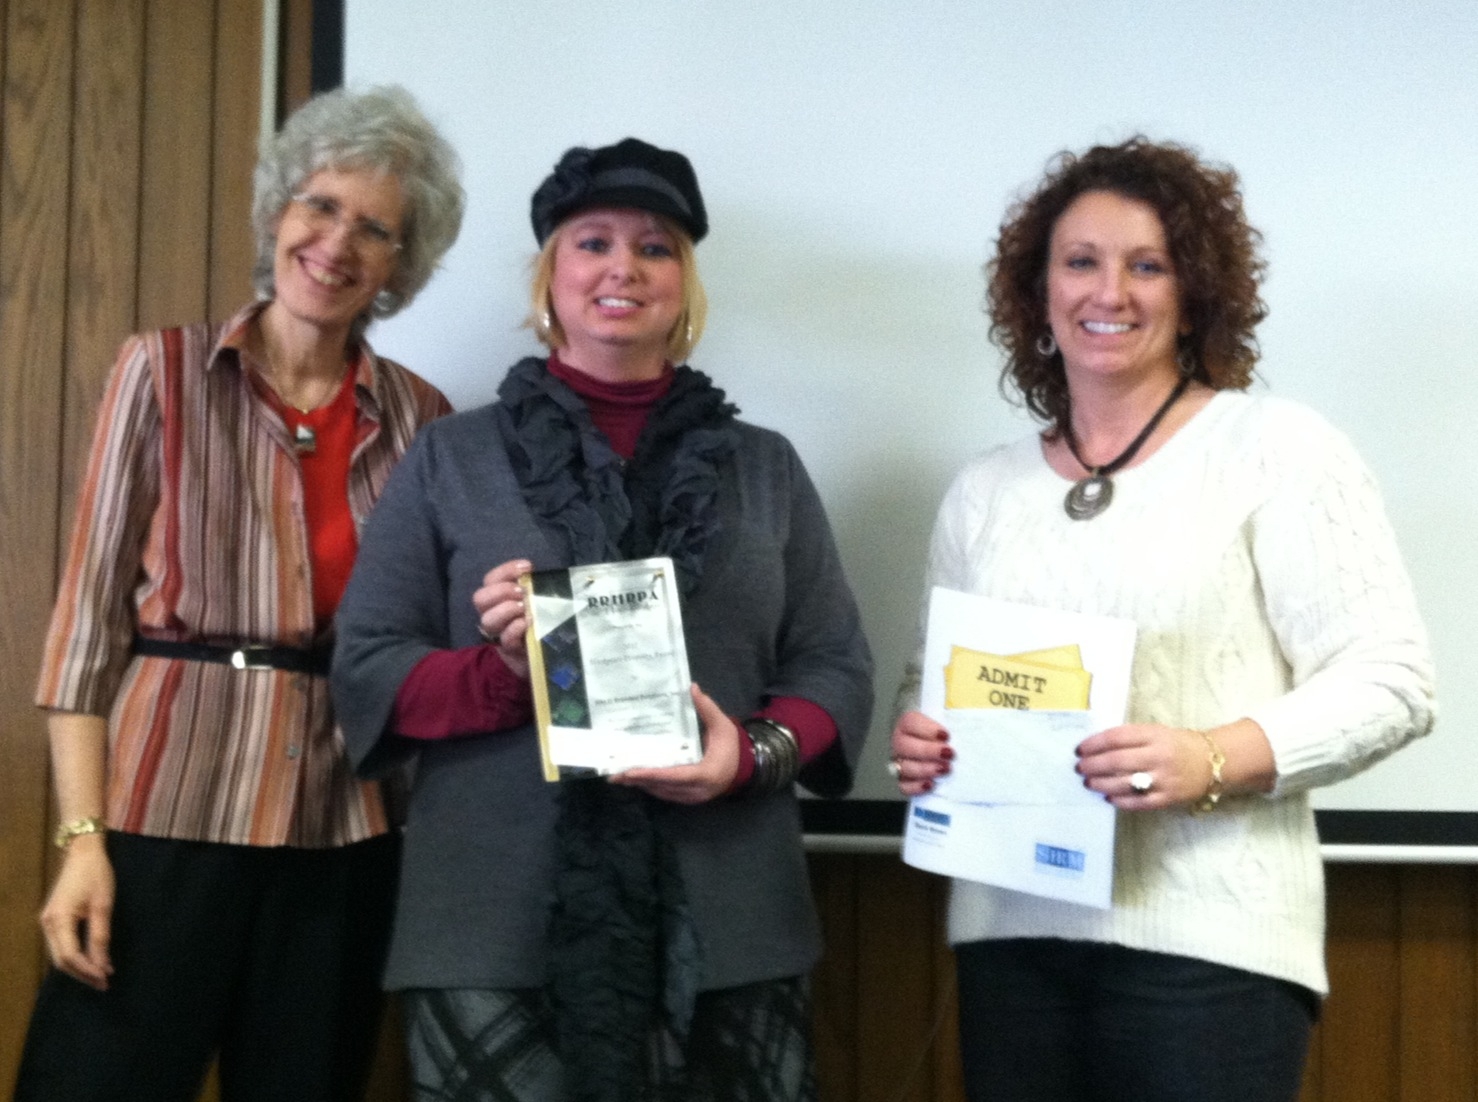 Carol Fitzgerald, Diversity Chair, presents the award to Ashley Houck and Lisa Taylor.